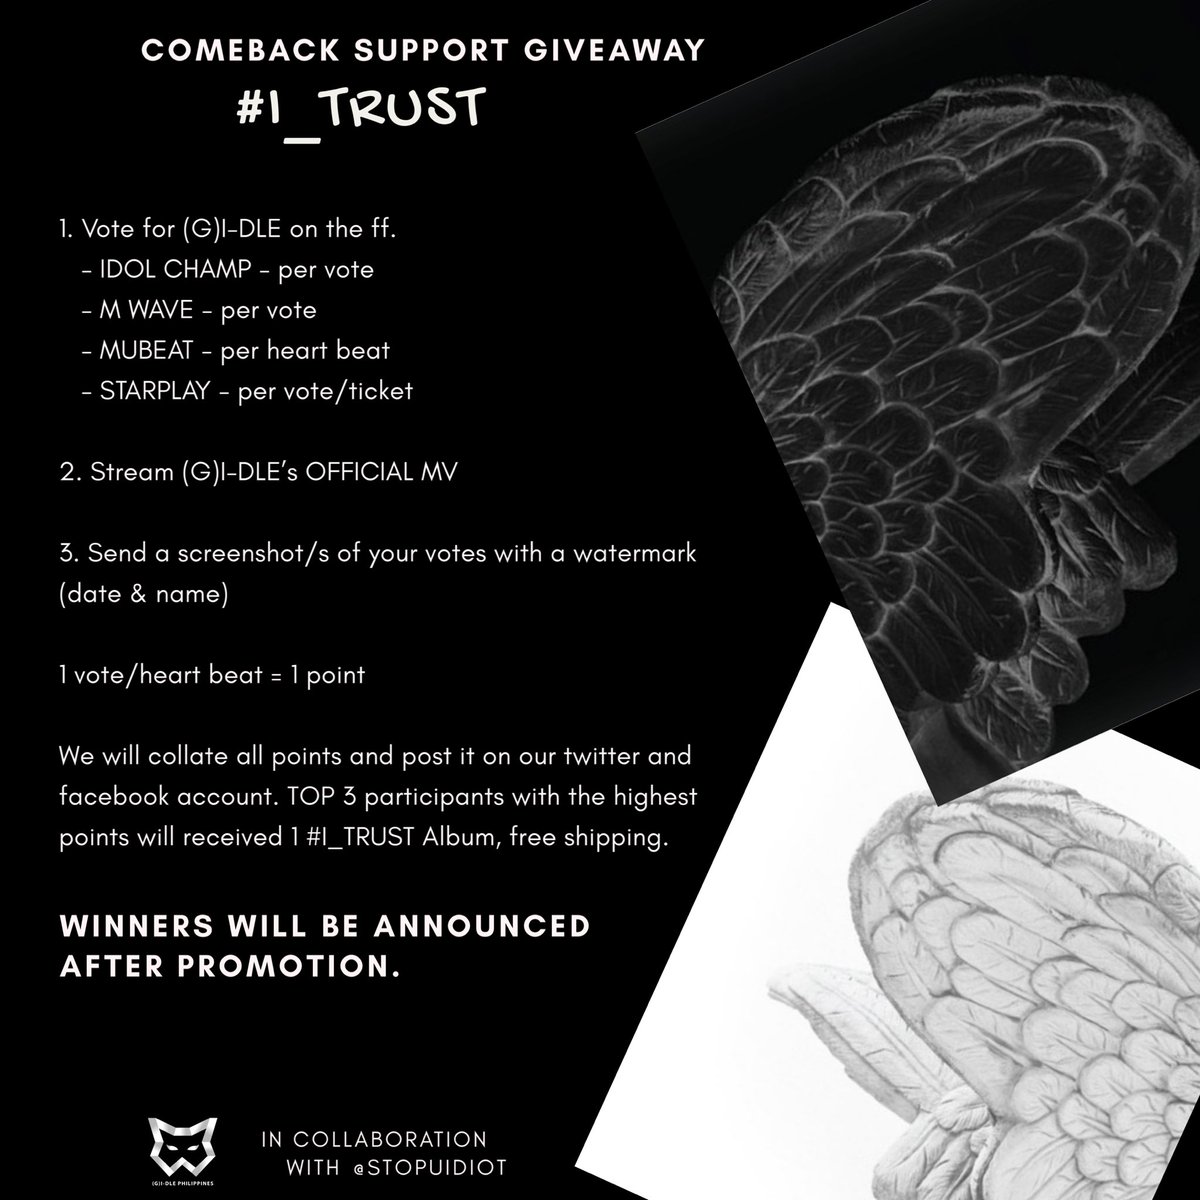  COMEBACK SUPPORT GIVEAWAY  #I_TRUST   [PH NEVIES ONLY ]In collaboration with  @stopuidiot, we will be giving out 3  #I_TRUST   Album to support  @G_I_DLE’s comeback! We will also shoulder the shipping fee.Please see mechanics below.  #여자아이들    #GIDLE   #네버랜드  #NEVERLAND